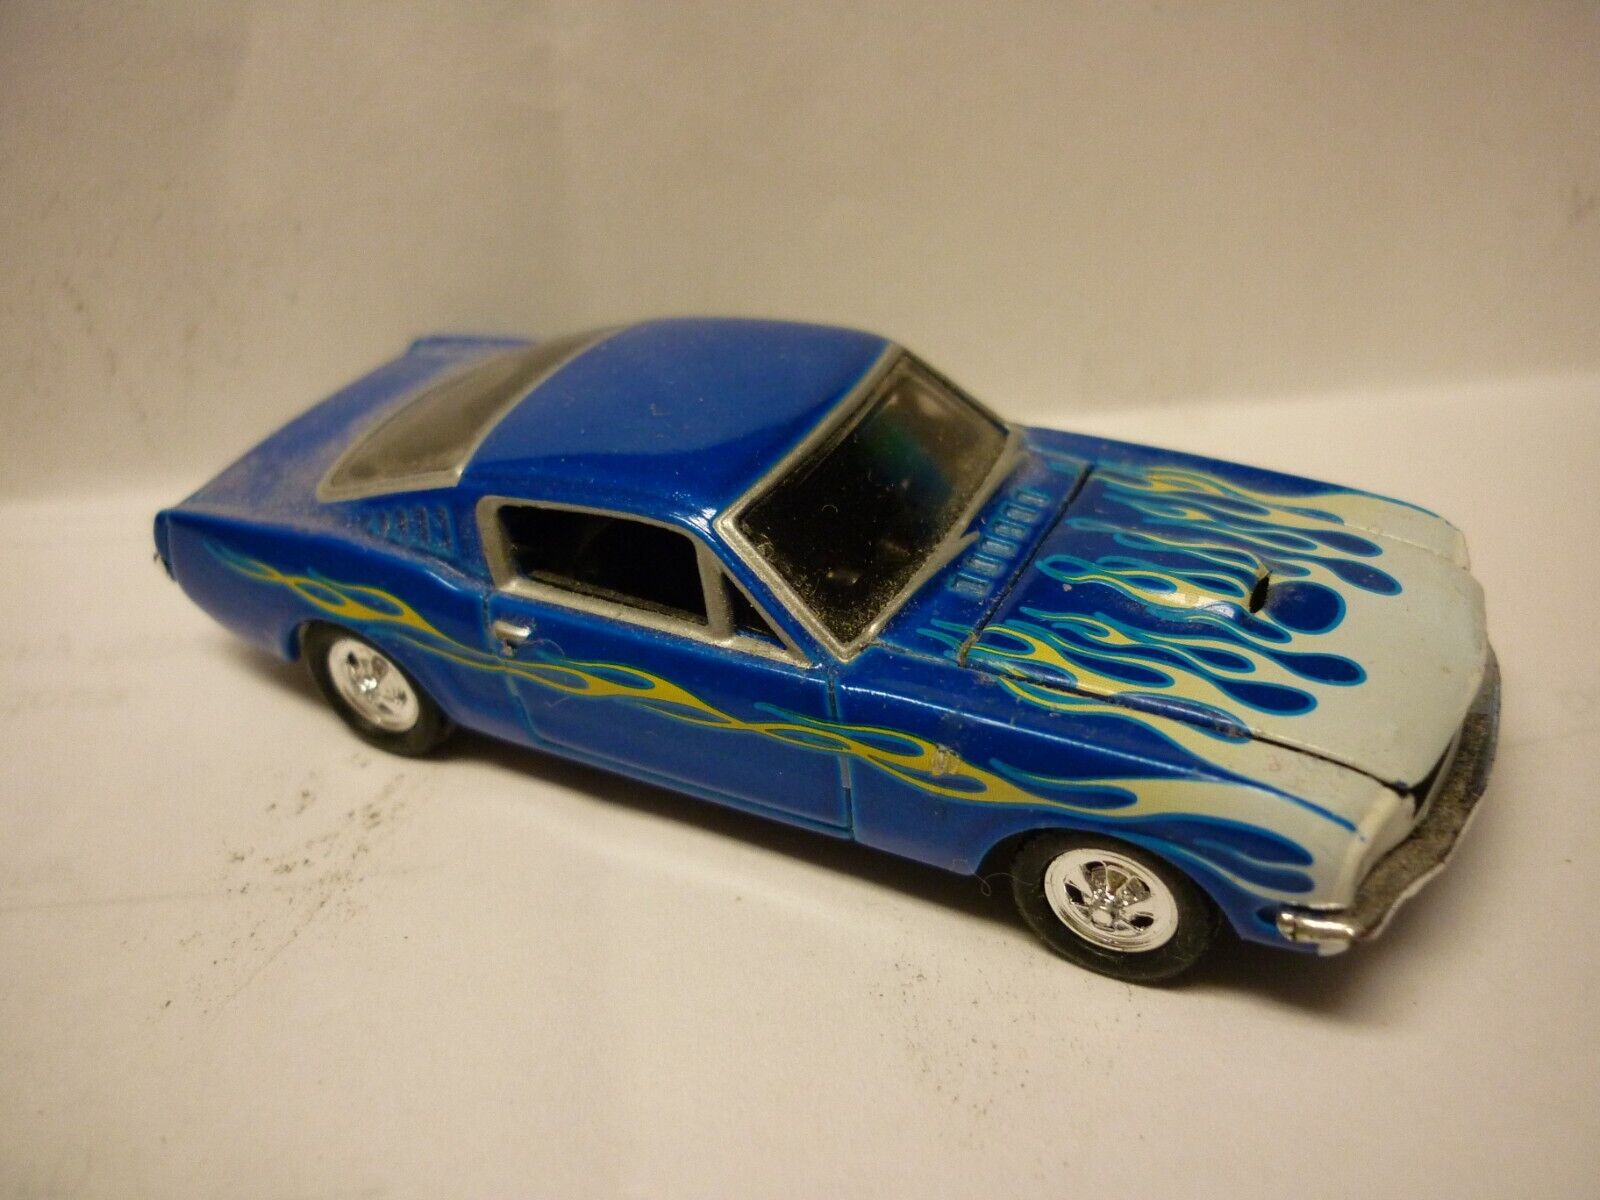 hot wheels 67 mustang GT500 from mustang monthy 2 car display case set